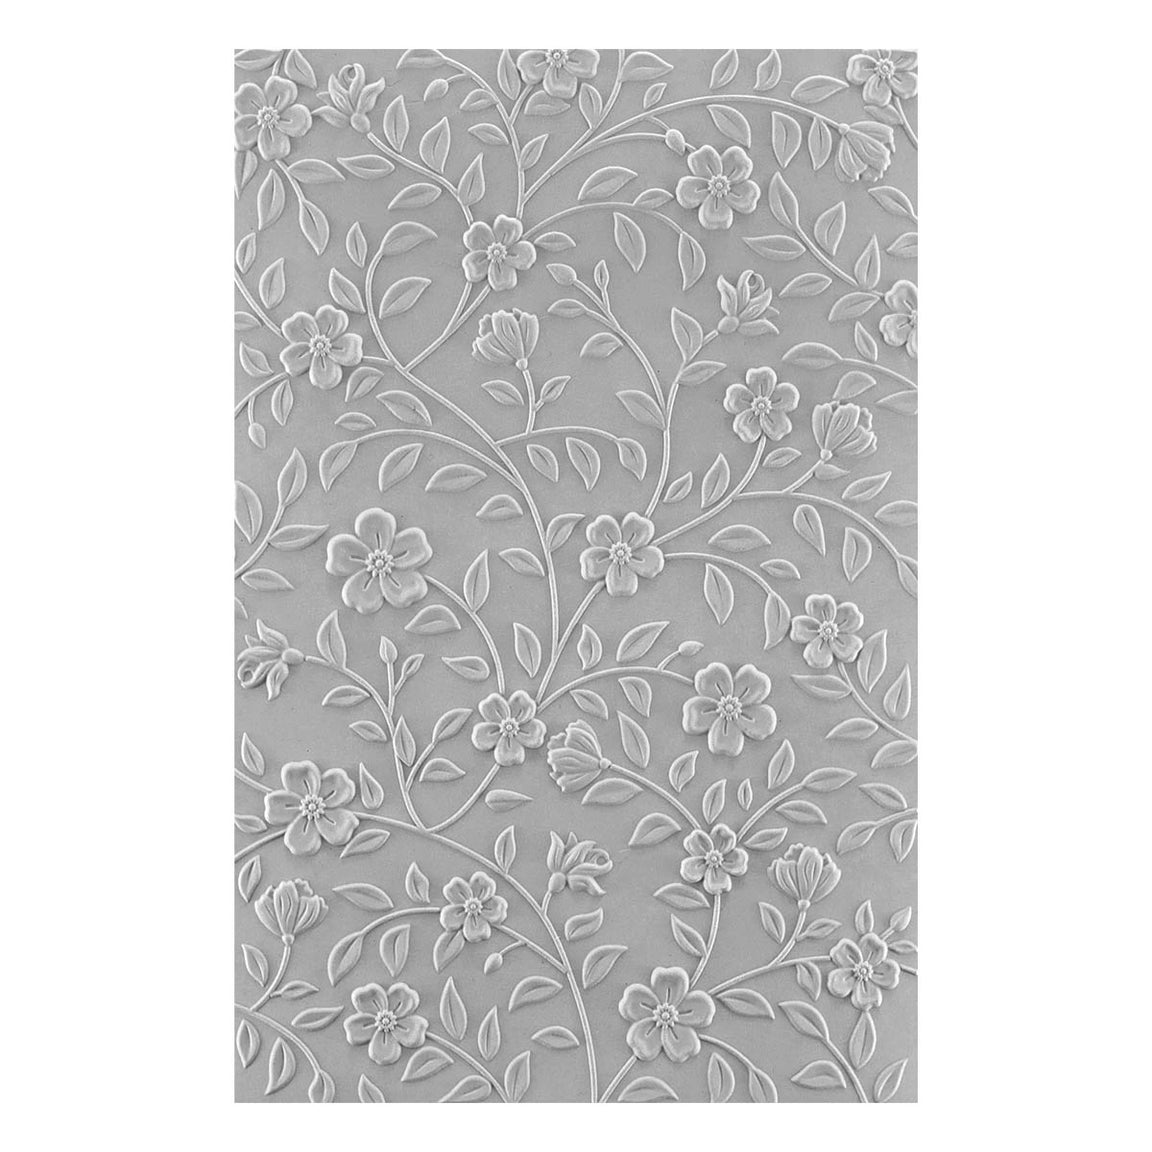 Spellbinders - From the Garden Collection - 3D Embossing Folder - Flowers &amp; Foliage-ScrapbookPal